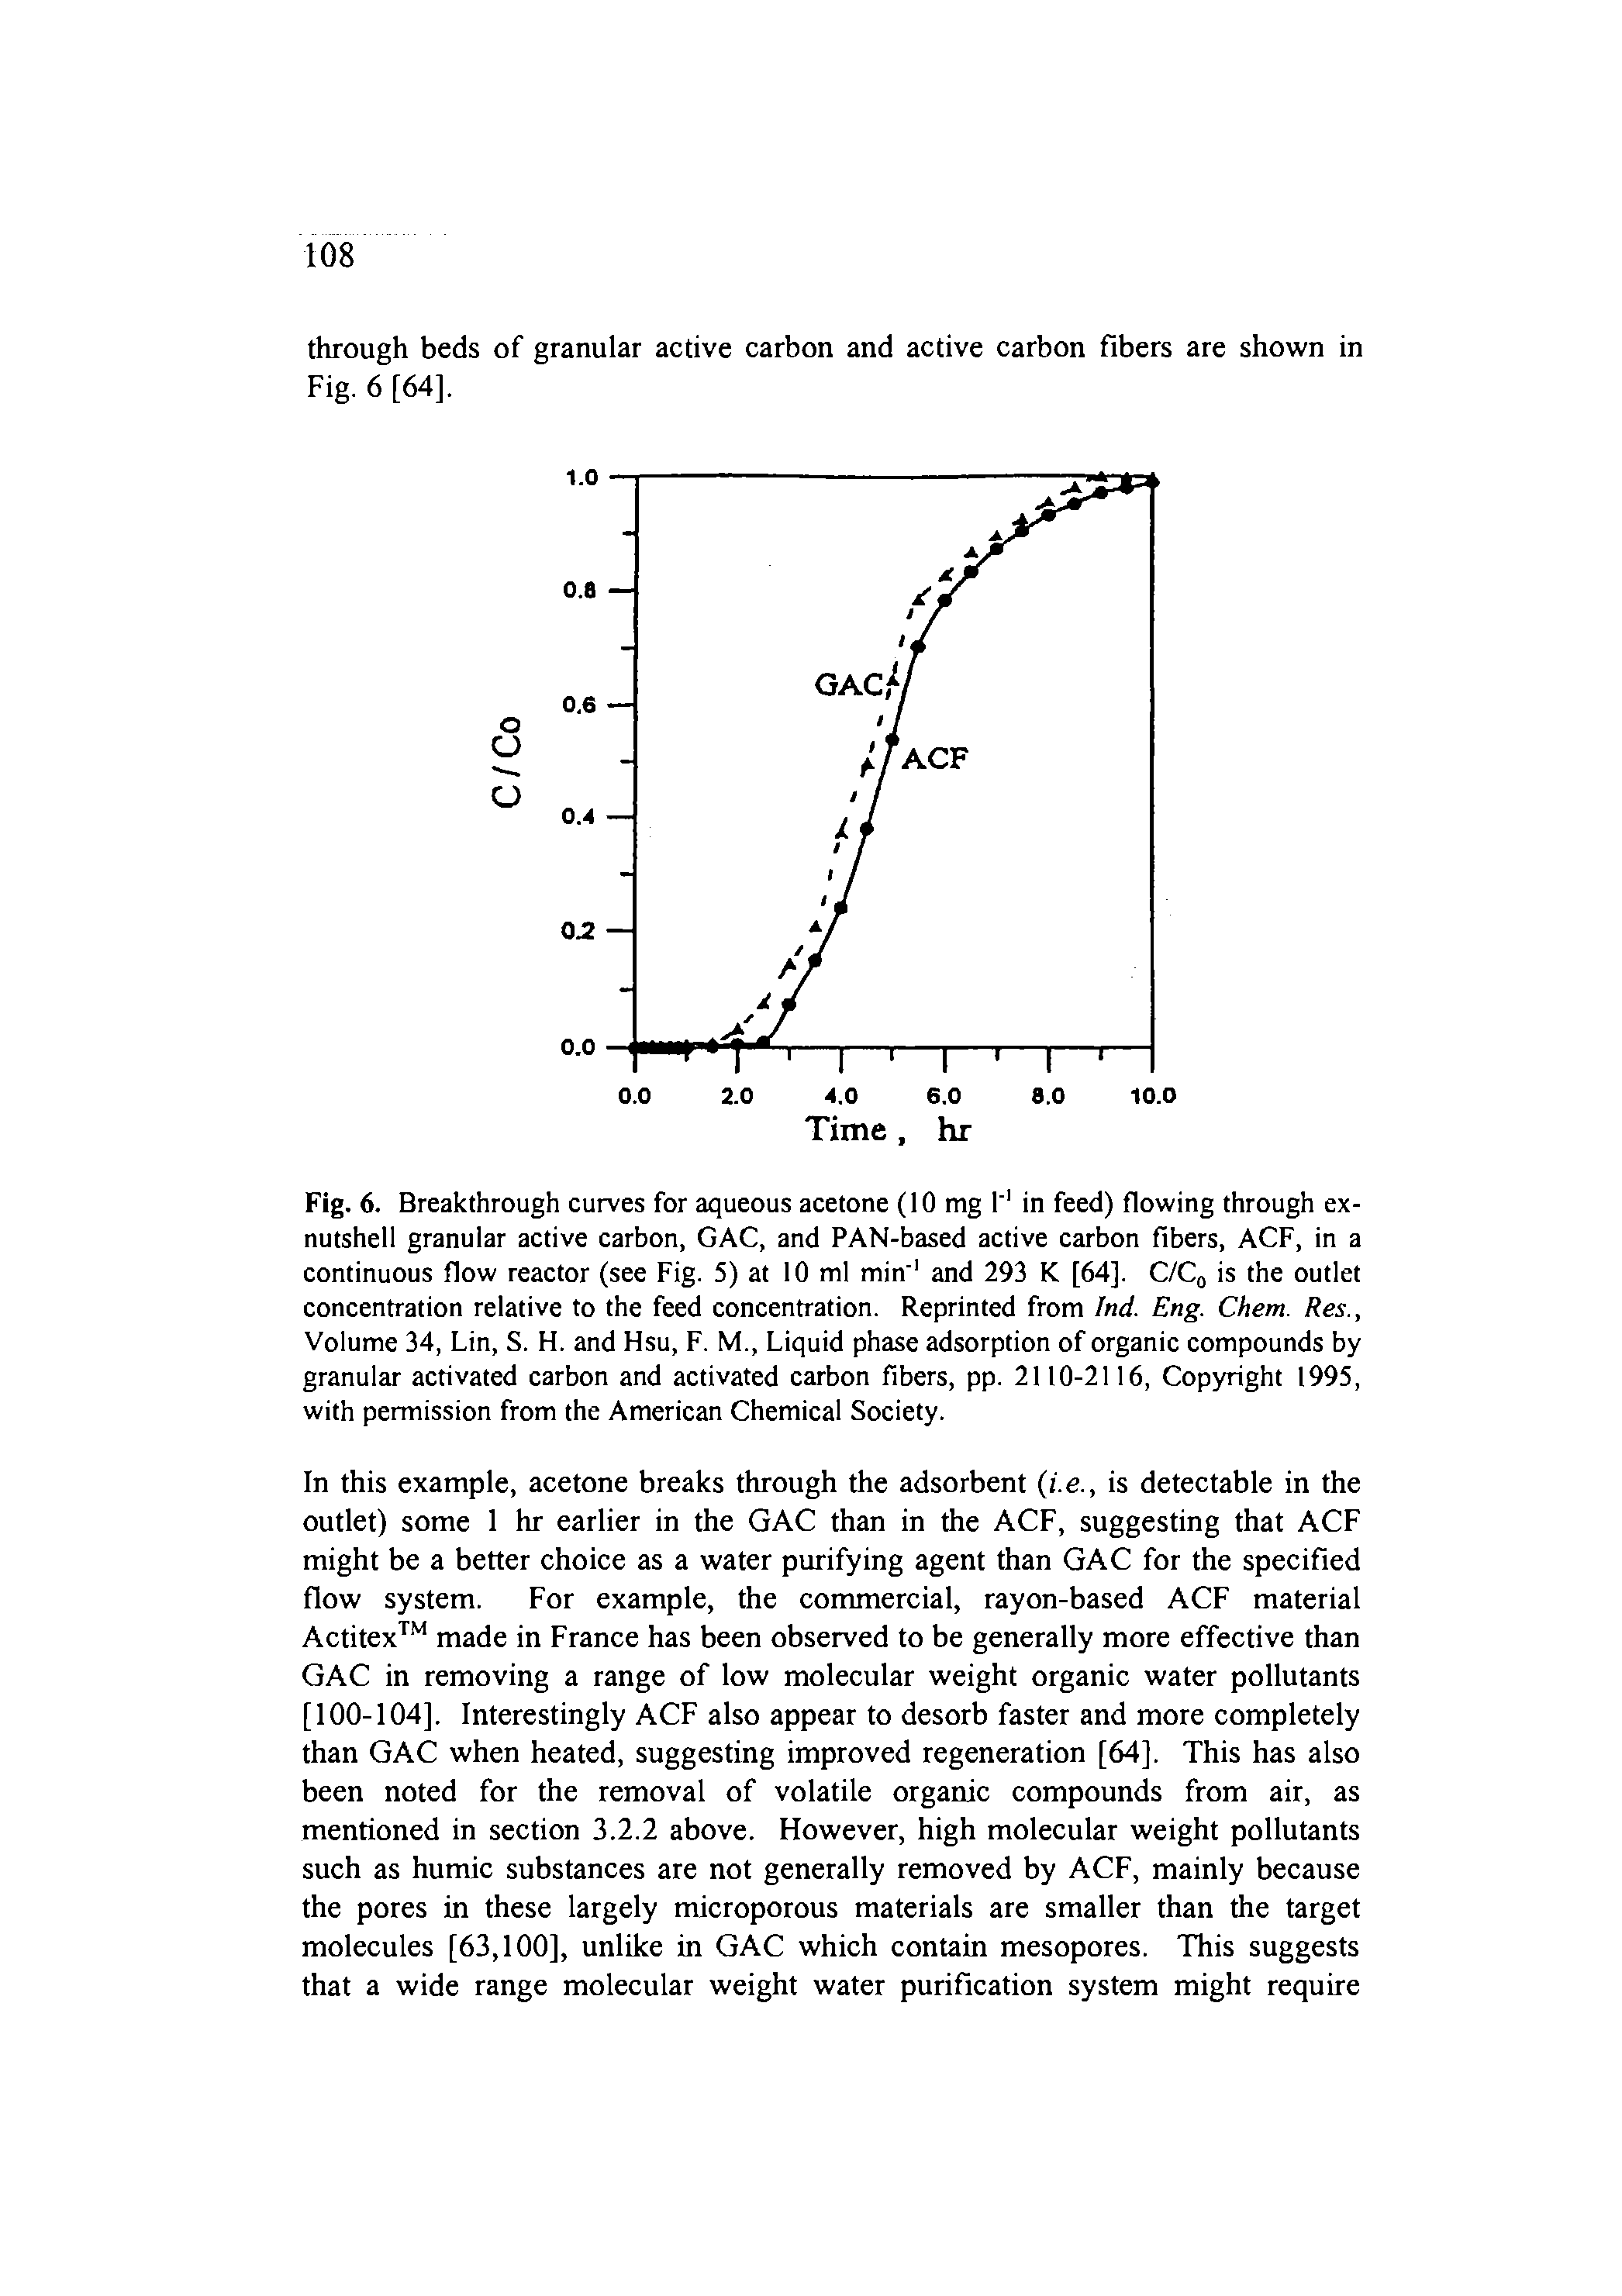 Fig. 6. Breakthrough curves for aqueous acetone (10 mg 1" in feed) flowing through exnutshell granular active carbon, GAC, and PAN-based active carbon fibers, ACF, in a continuous flow reactor (see Fig. 5) at 10 ml min" and 293 K [64]. C/Cq is the outlet concentration relative to the feed concentration. Reprinted from Ind. Eng. Chem. Res., Volume 34, Lin, S. H. and Hsu, F. M., Liquid phase adsorption of organic compounds by granular activated carbon and activated carbon fibers, pp. 2110-2116, Copyright 1995, with permission from the American Chemical Society.